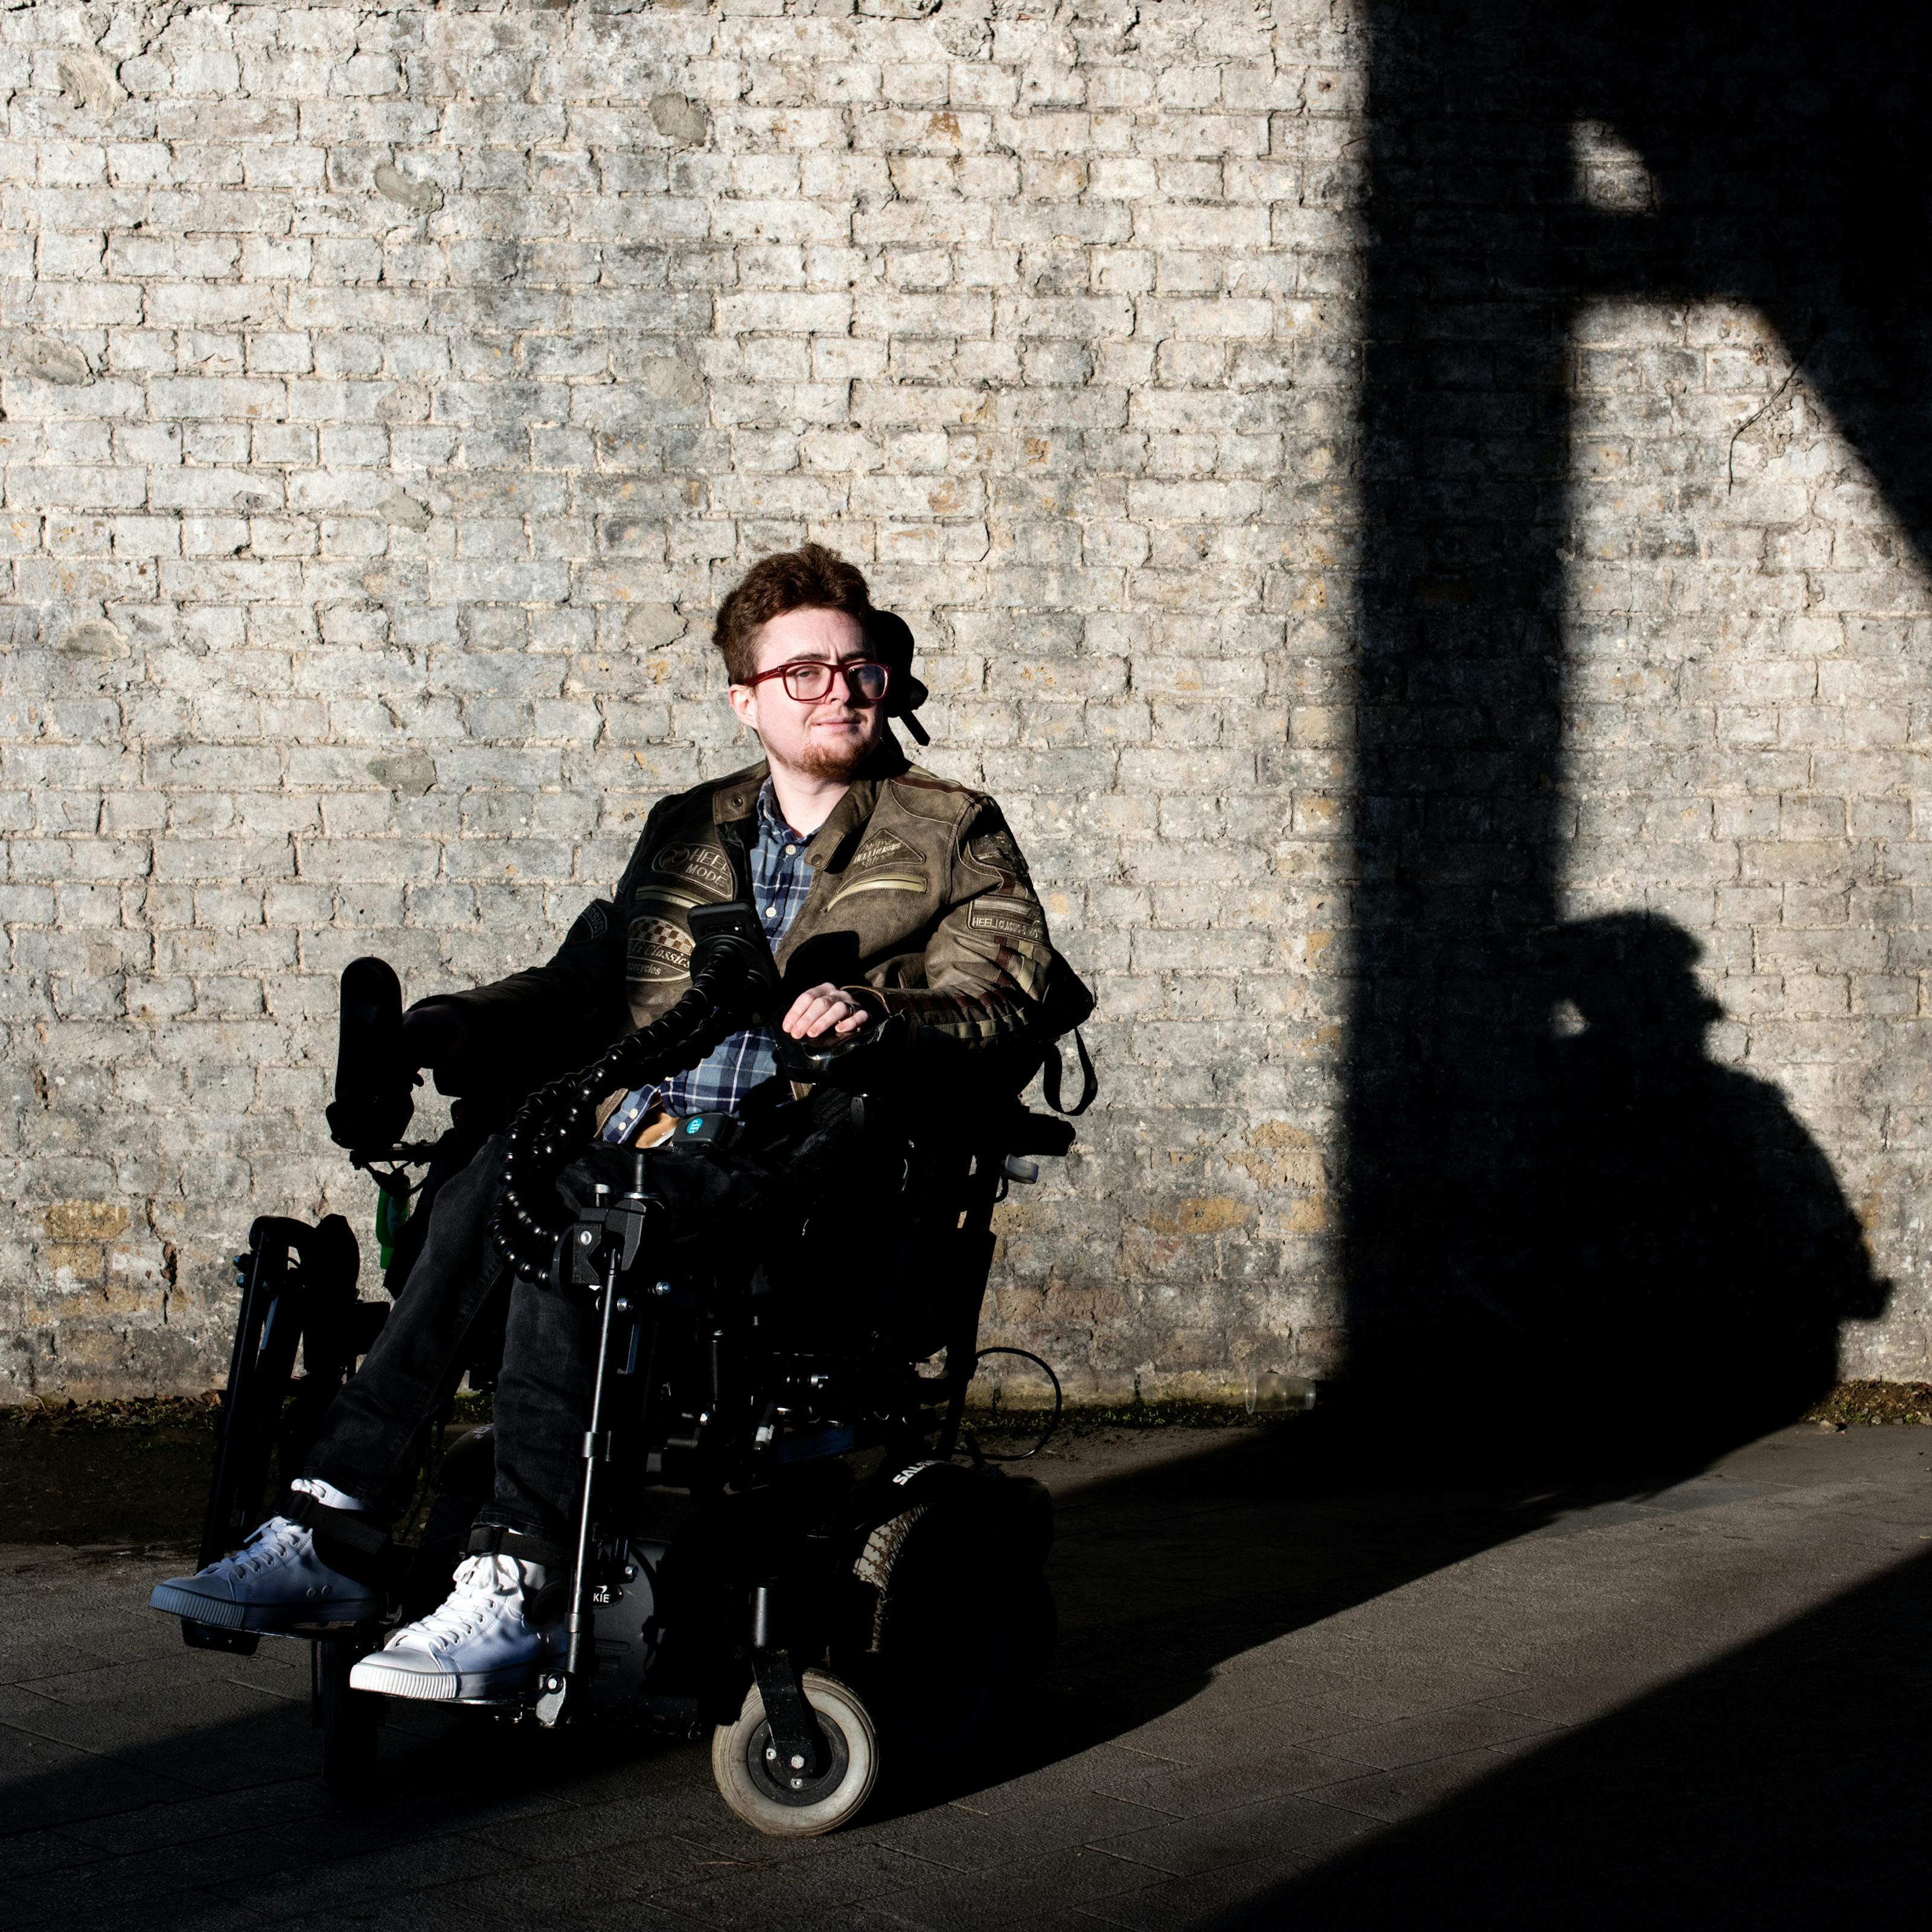 Photograph of a young person in a motorised wheelchair outside, in front of a white washed brick wall. They are lit by a low sun which is casting long shadows against the wall.